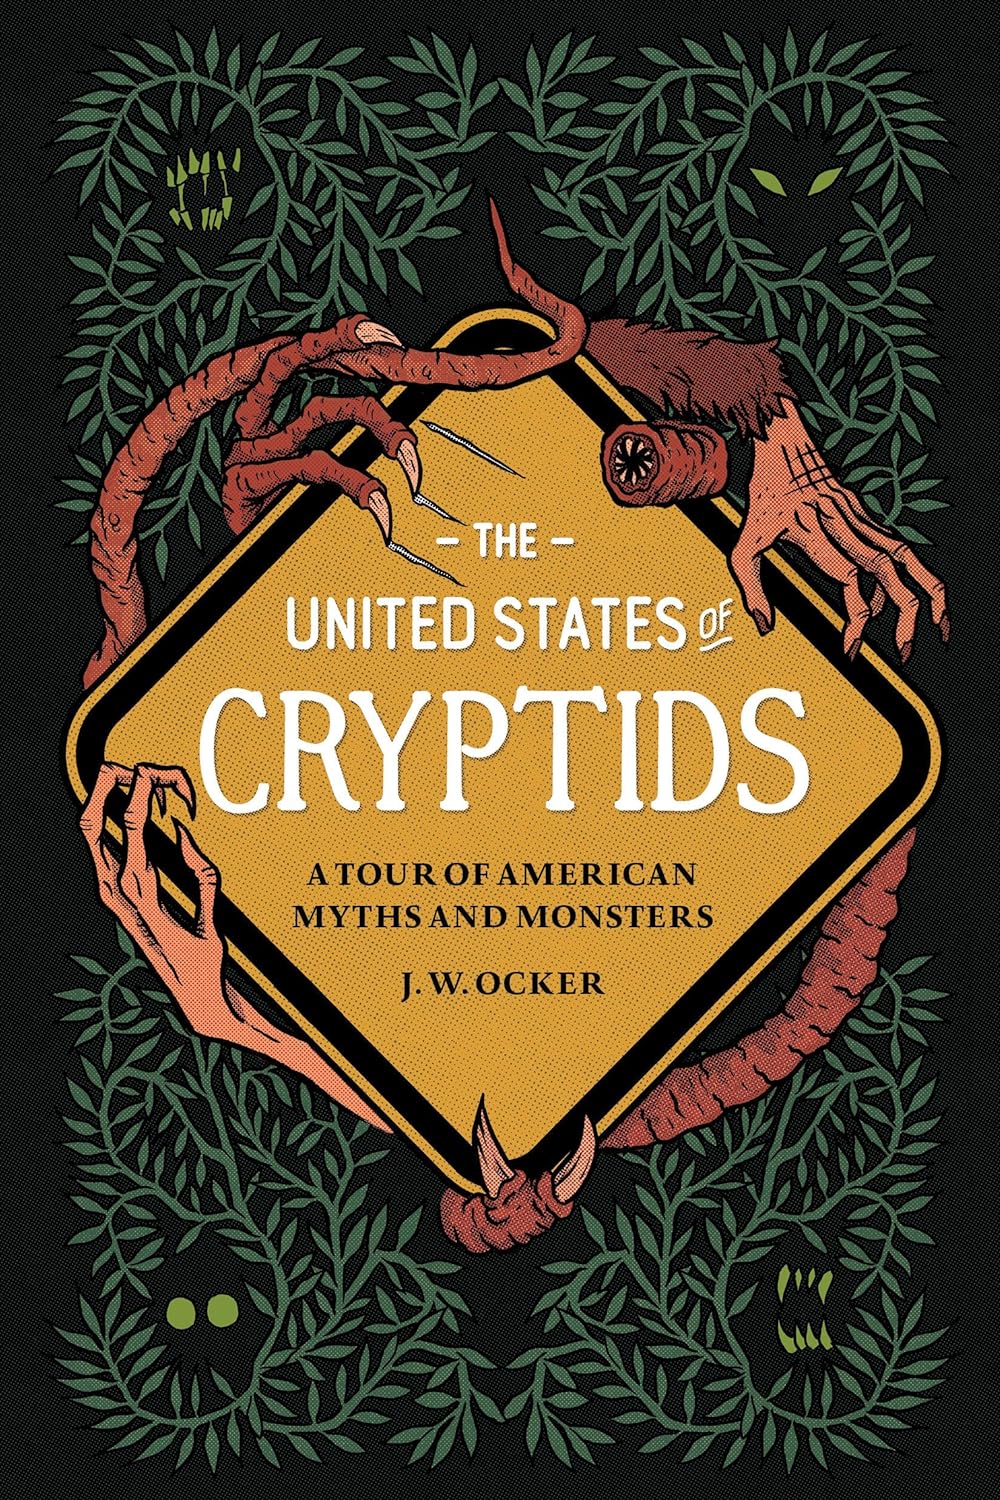 The United States of Cryptids: A Tour of American Myths and Monsters Hardcover